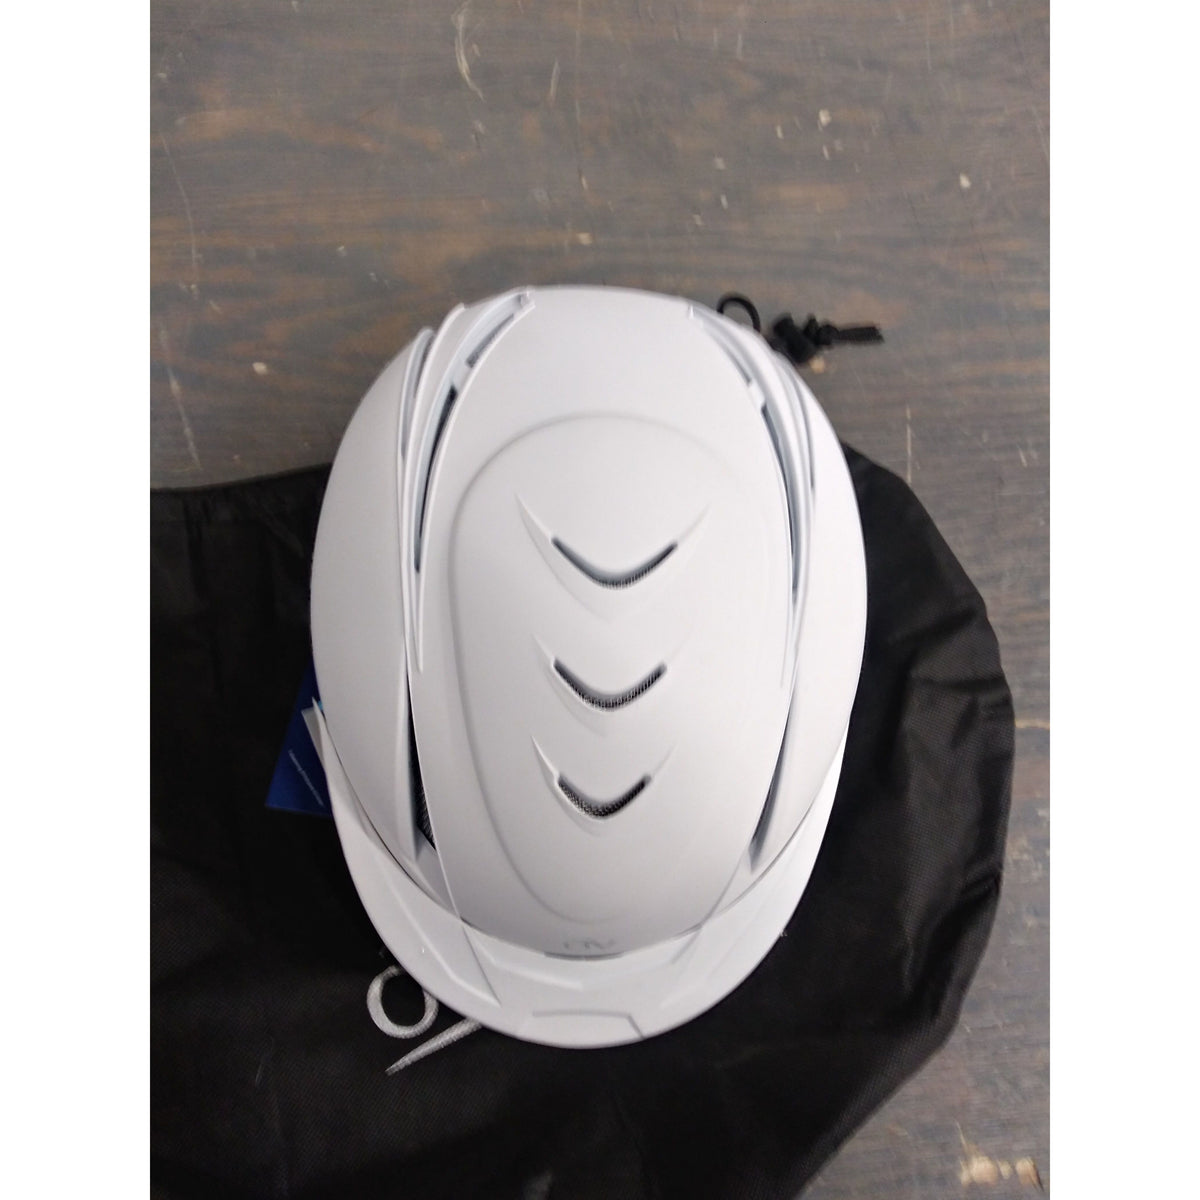 Ovation Deluxe Schooler Helmet - White - Large/X-Large - Used - Acceptable